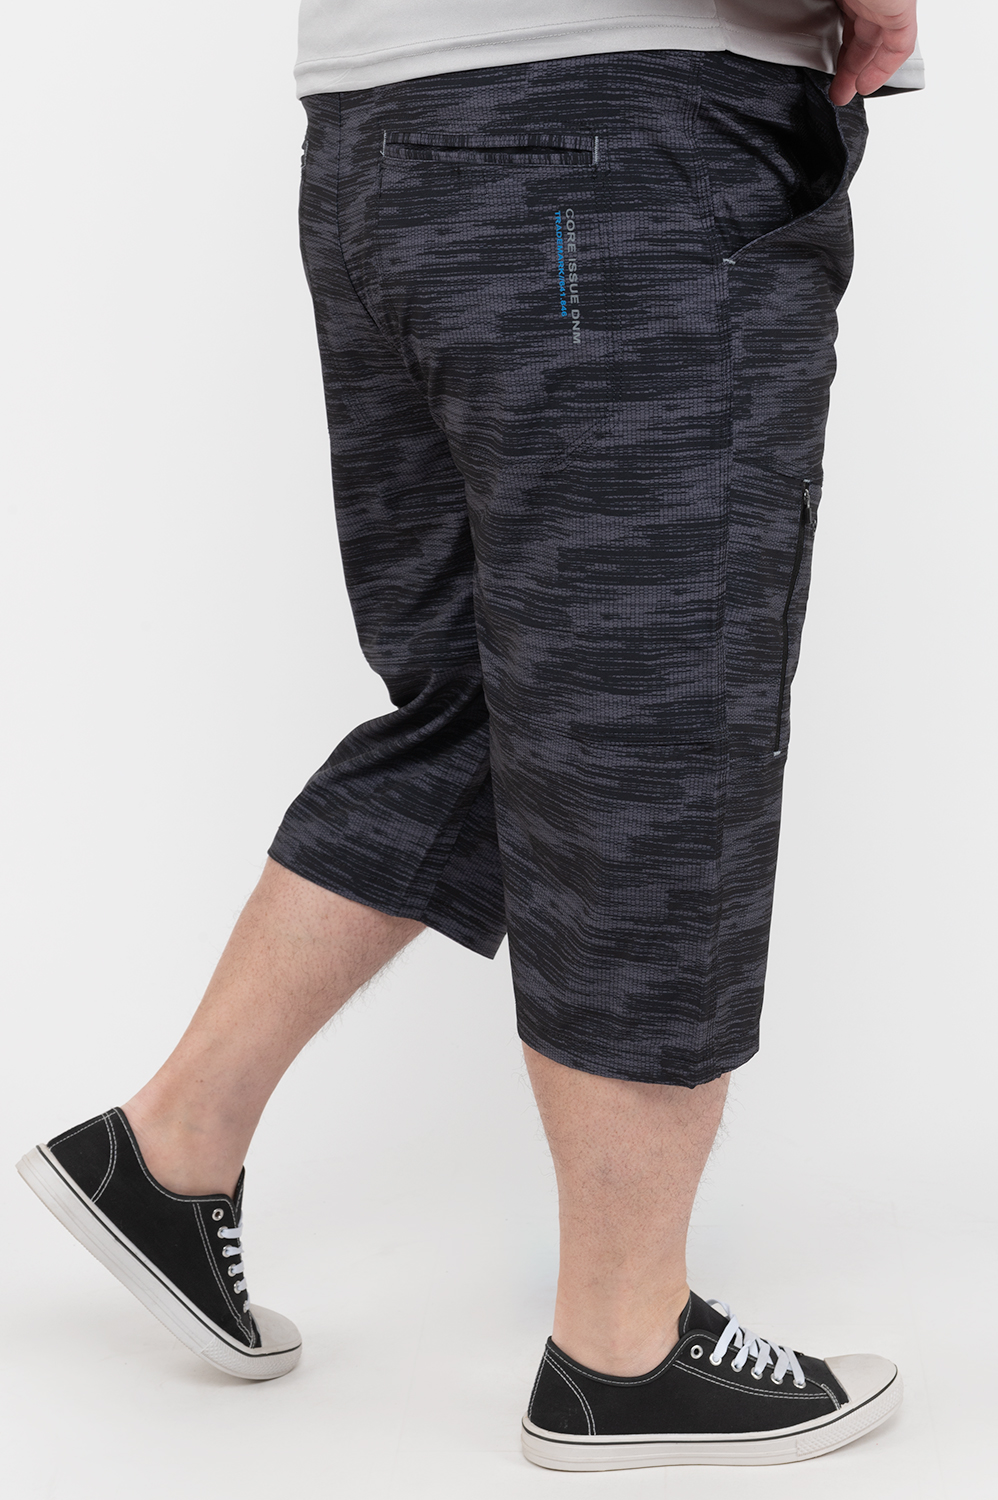 https://www.rossy.ca/media/A2W/products/capri-shorts-with-zippered-pockets-heathered-black-plus-size-73997-3.jpg